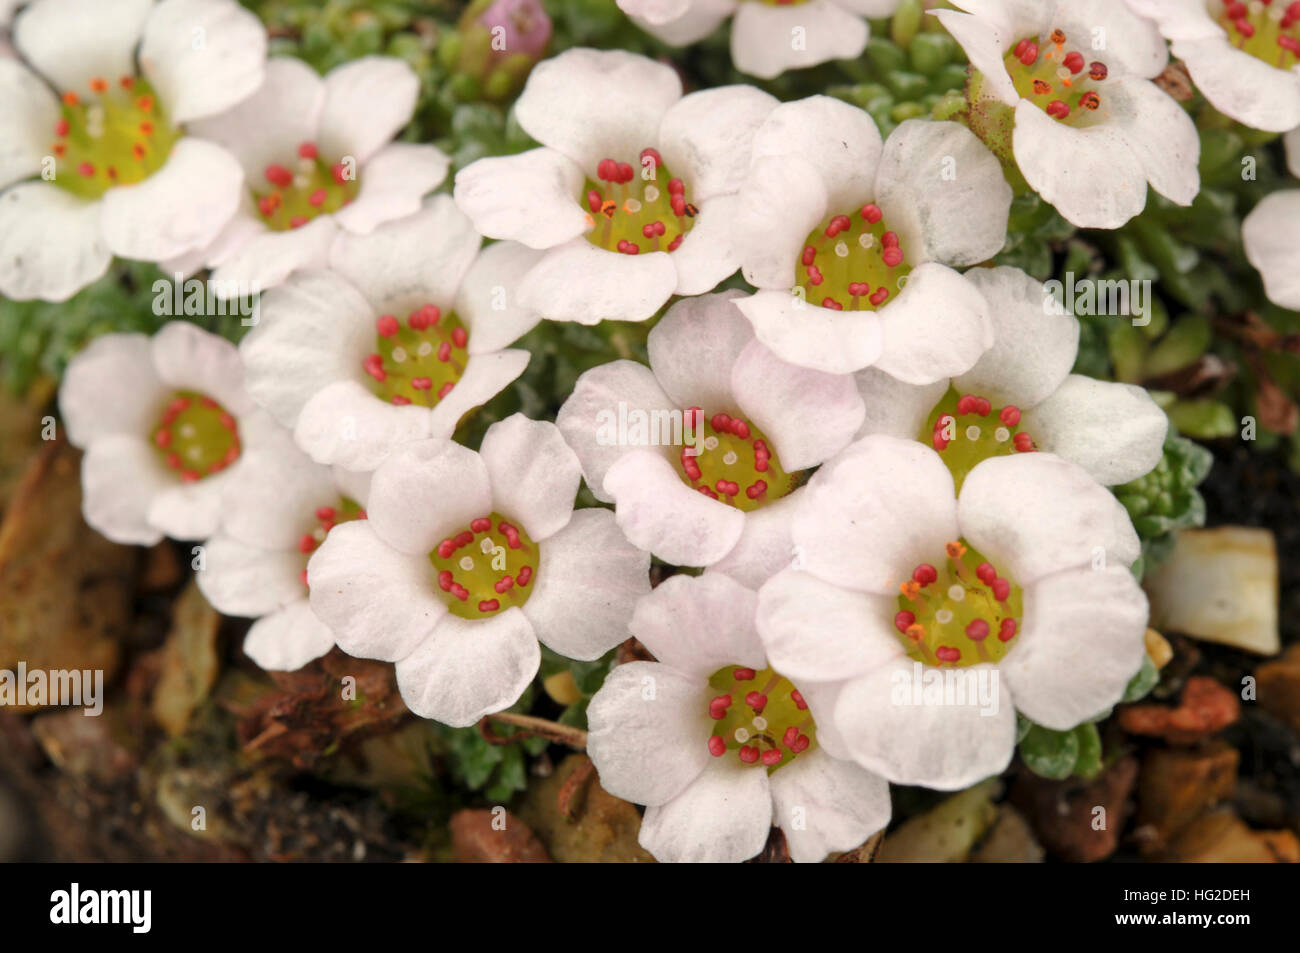 The stunning flowers of Saxifraga andersonii x poluniniana 'Allendale Host' Stock Photo